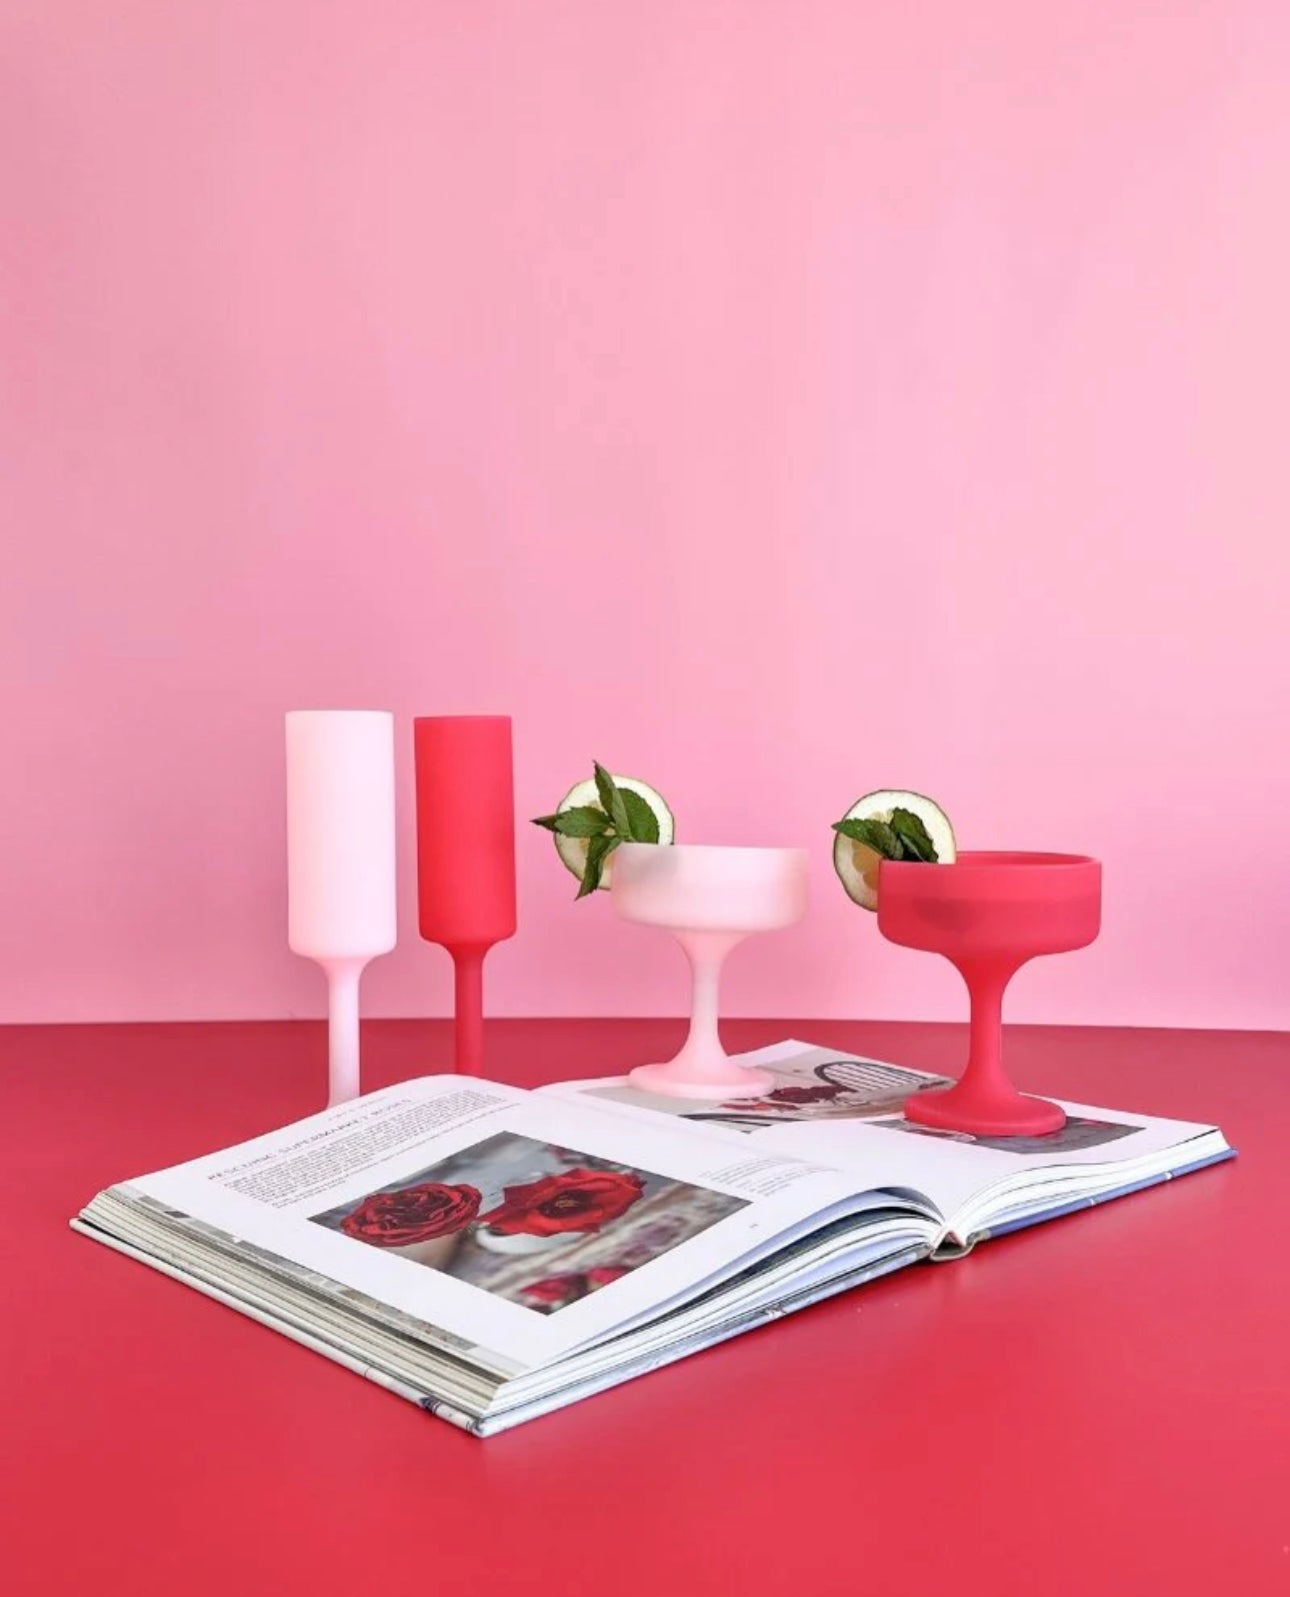 Cherry + Blush | Mecc | Silicone Unbreakable Cocktail Glasses